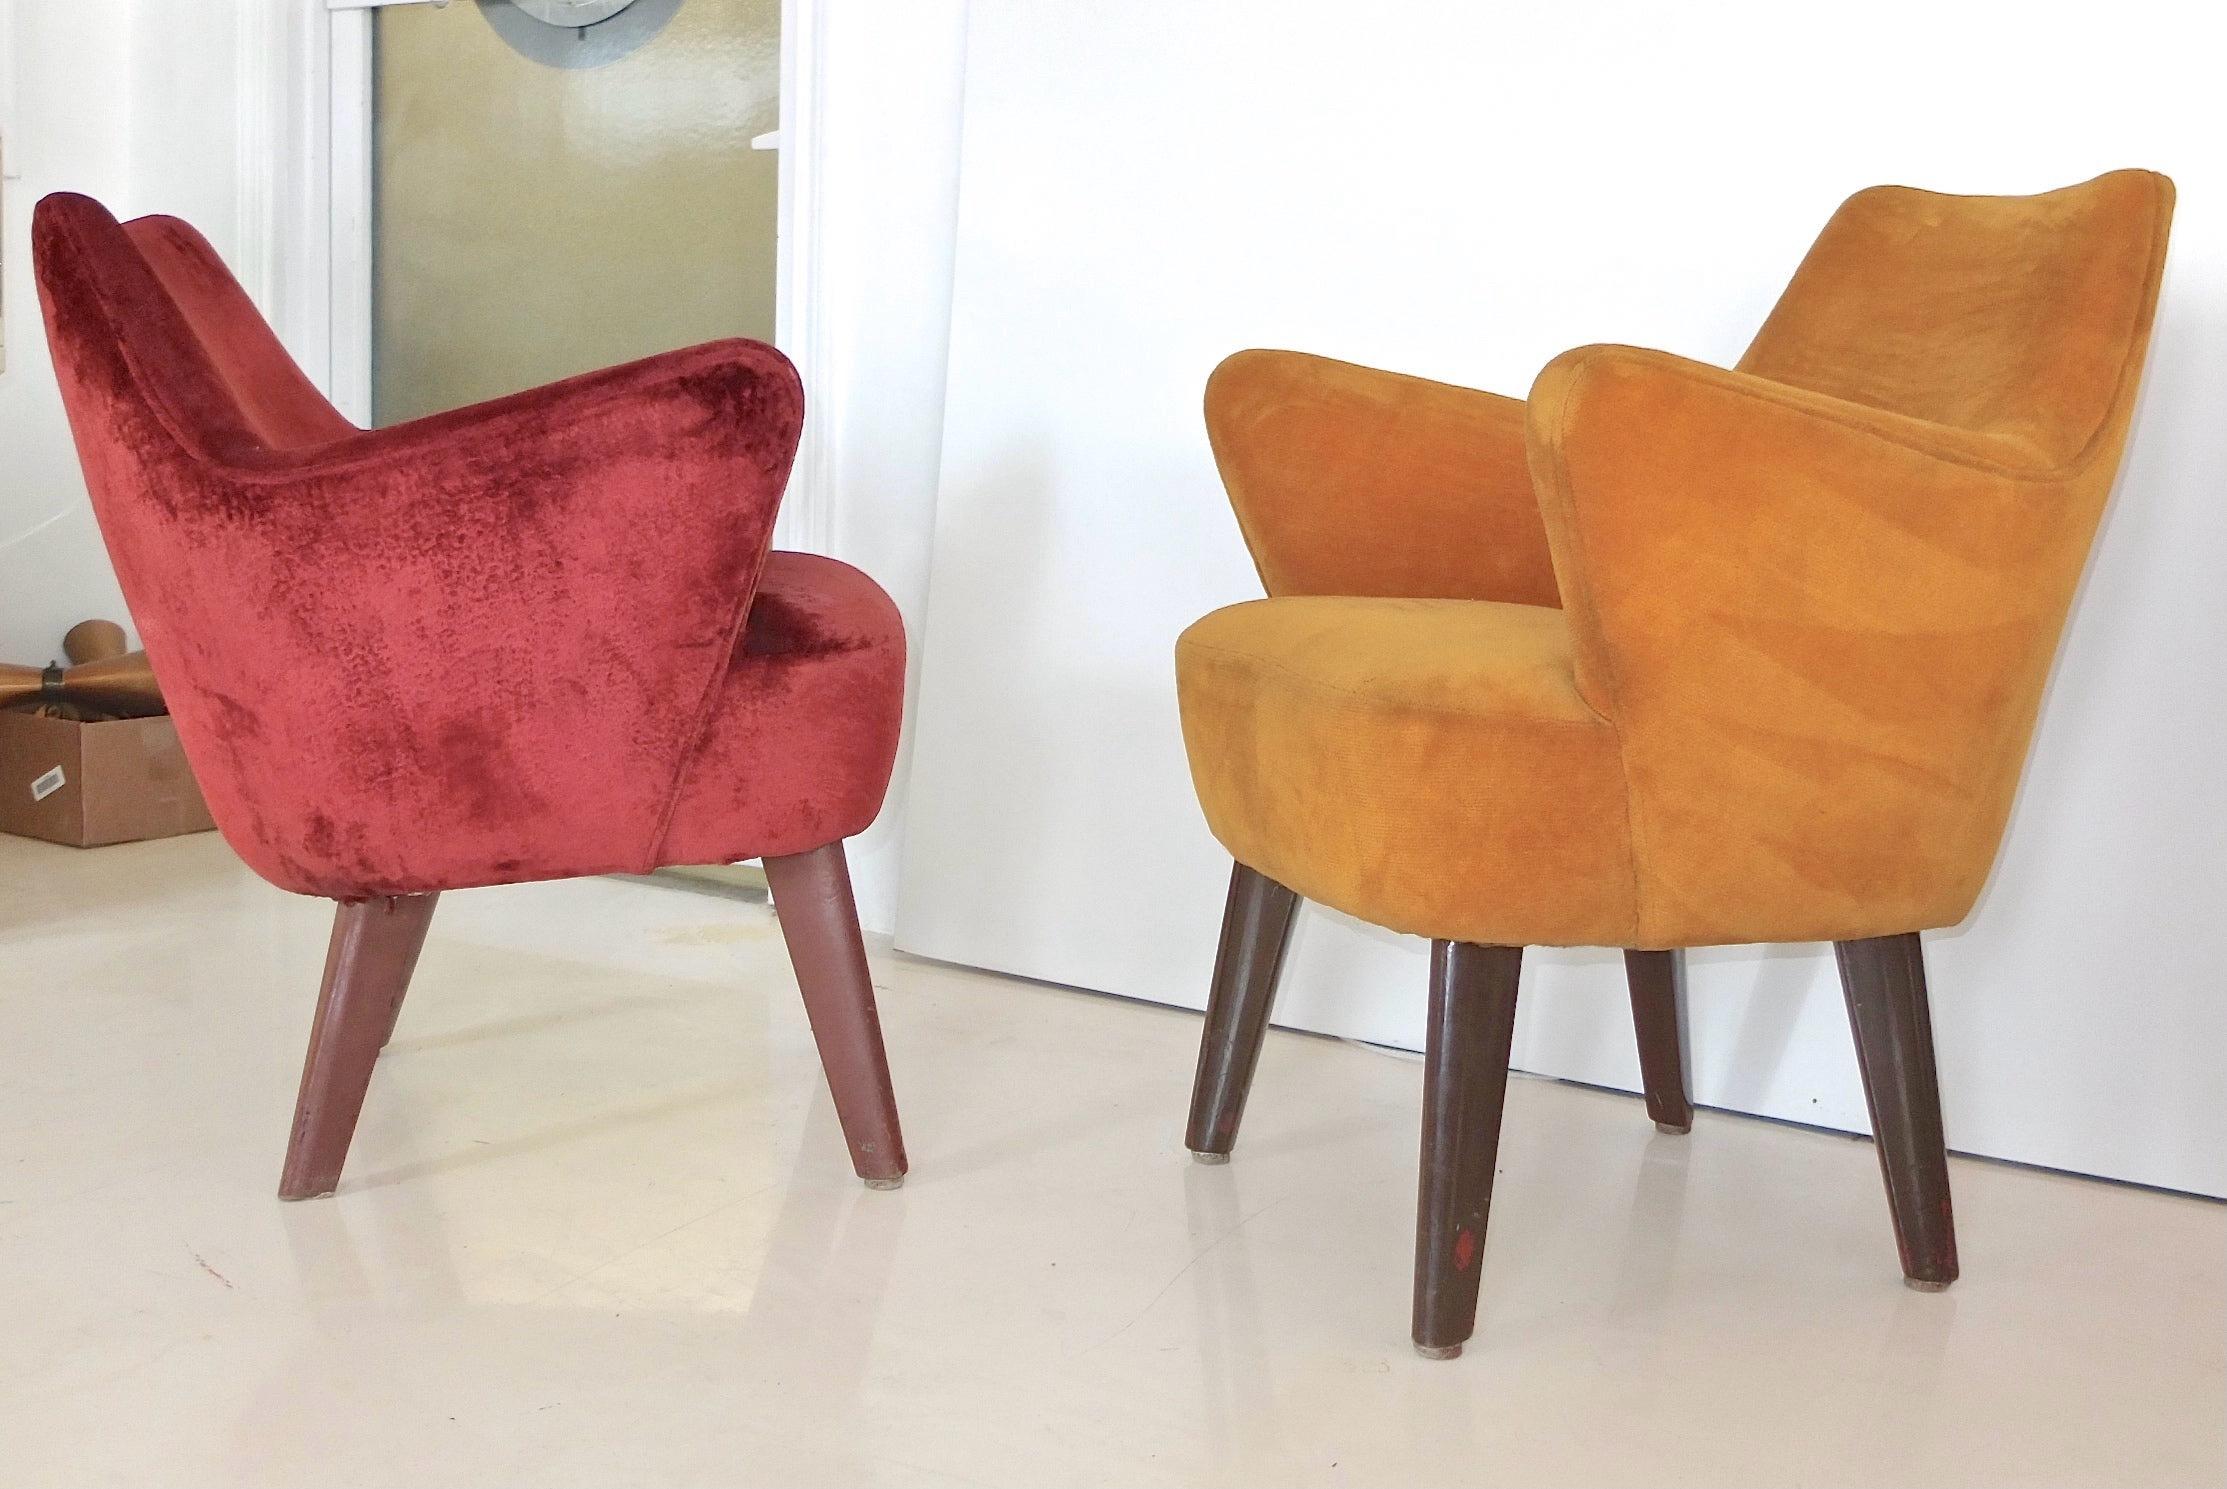 Gio Ponti Chairs from Augustus Ocean Liner - Pairs X3 For Sale 5